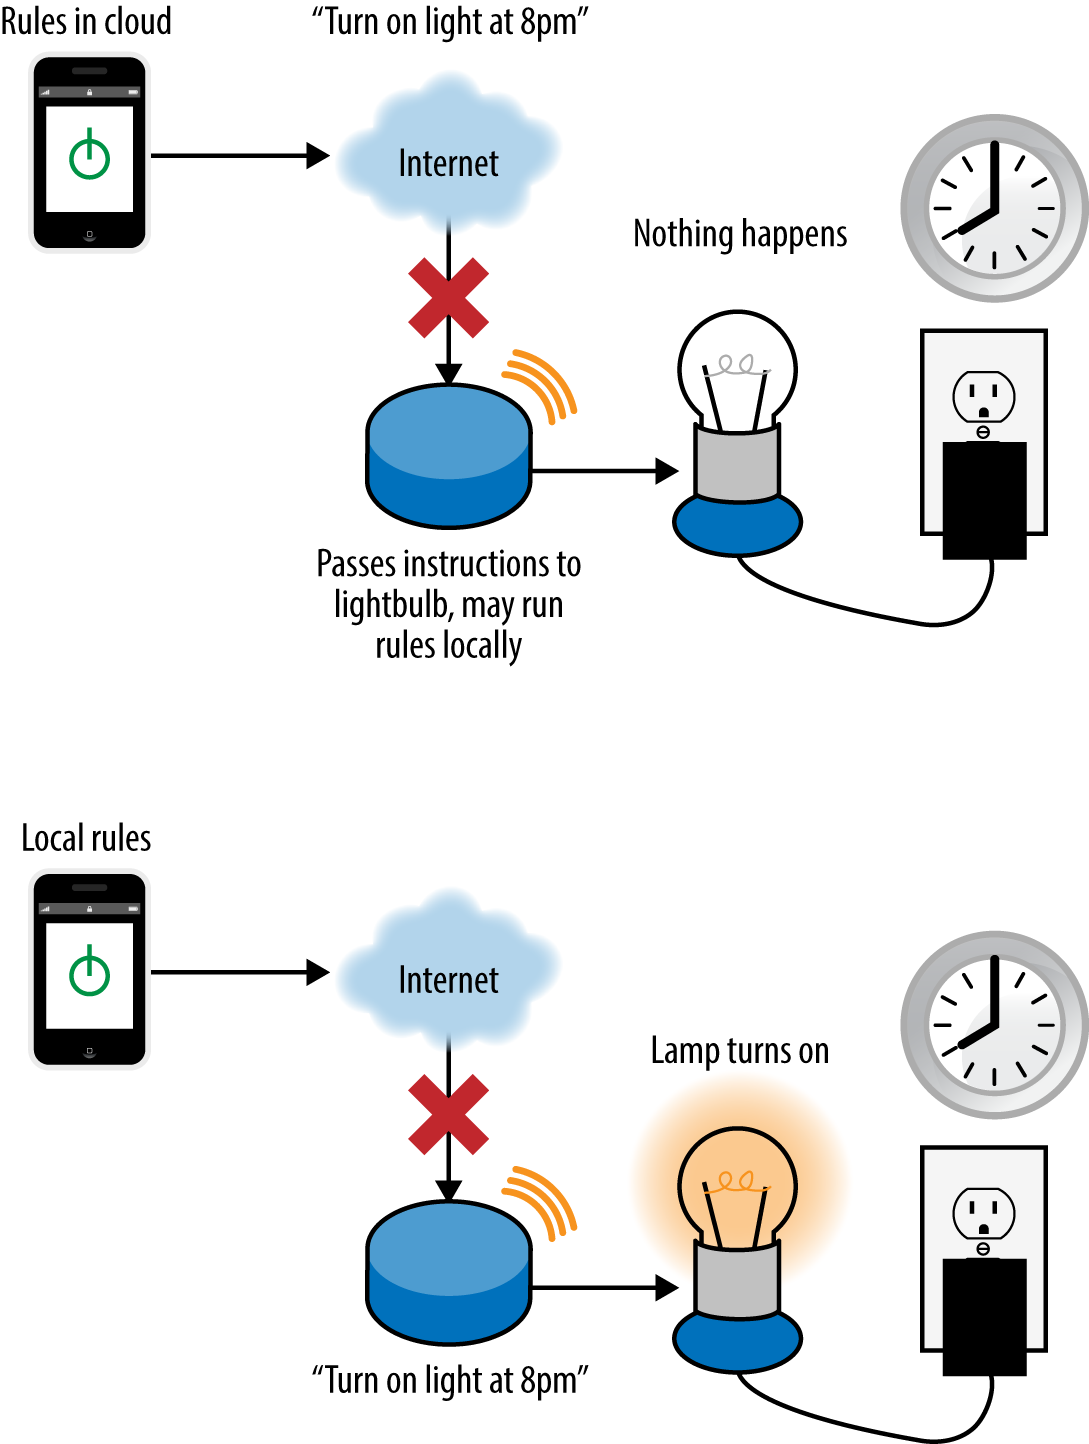 Connected home systems often offer automation rules, such as turning a light off at a specific time. If these are stored in the cloud, they will not run if the home Internet connection goes down. If they are stored locally, they will continue to run, but the user won’t be able to see this or control devices remotely.